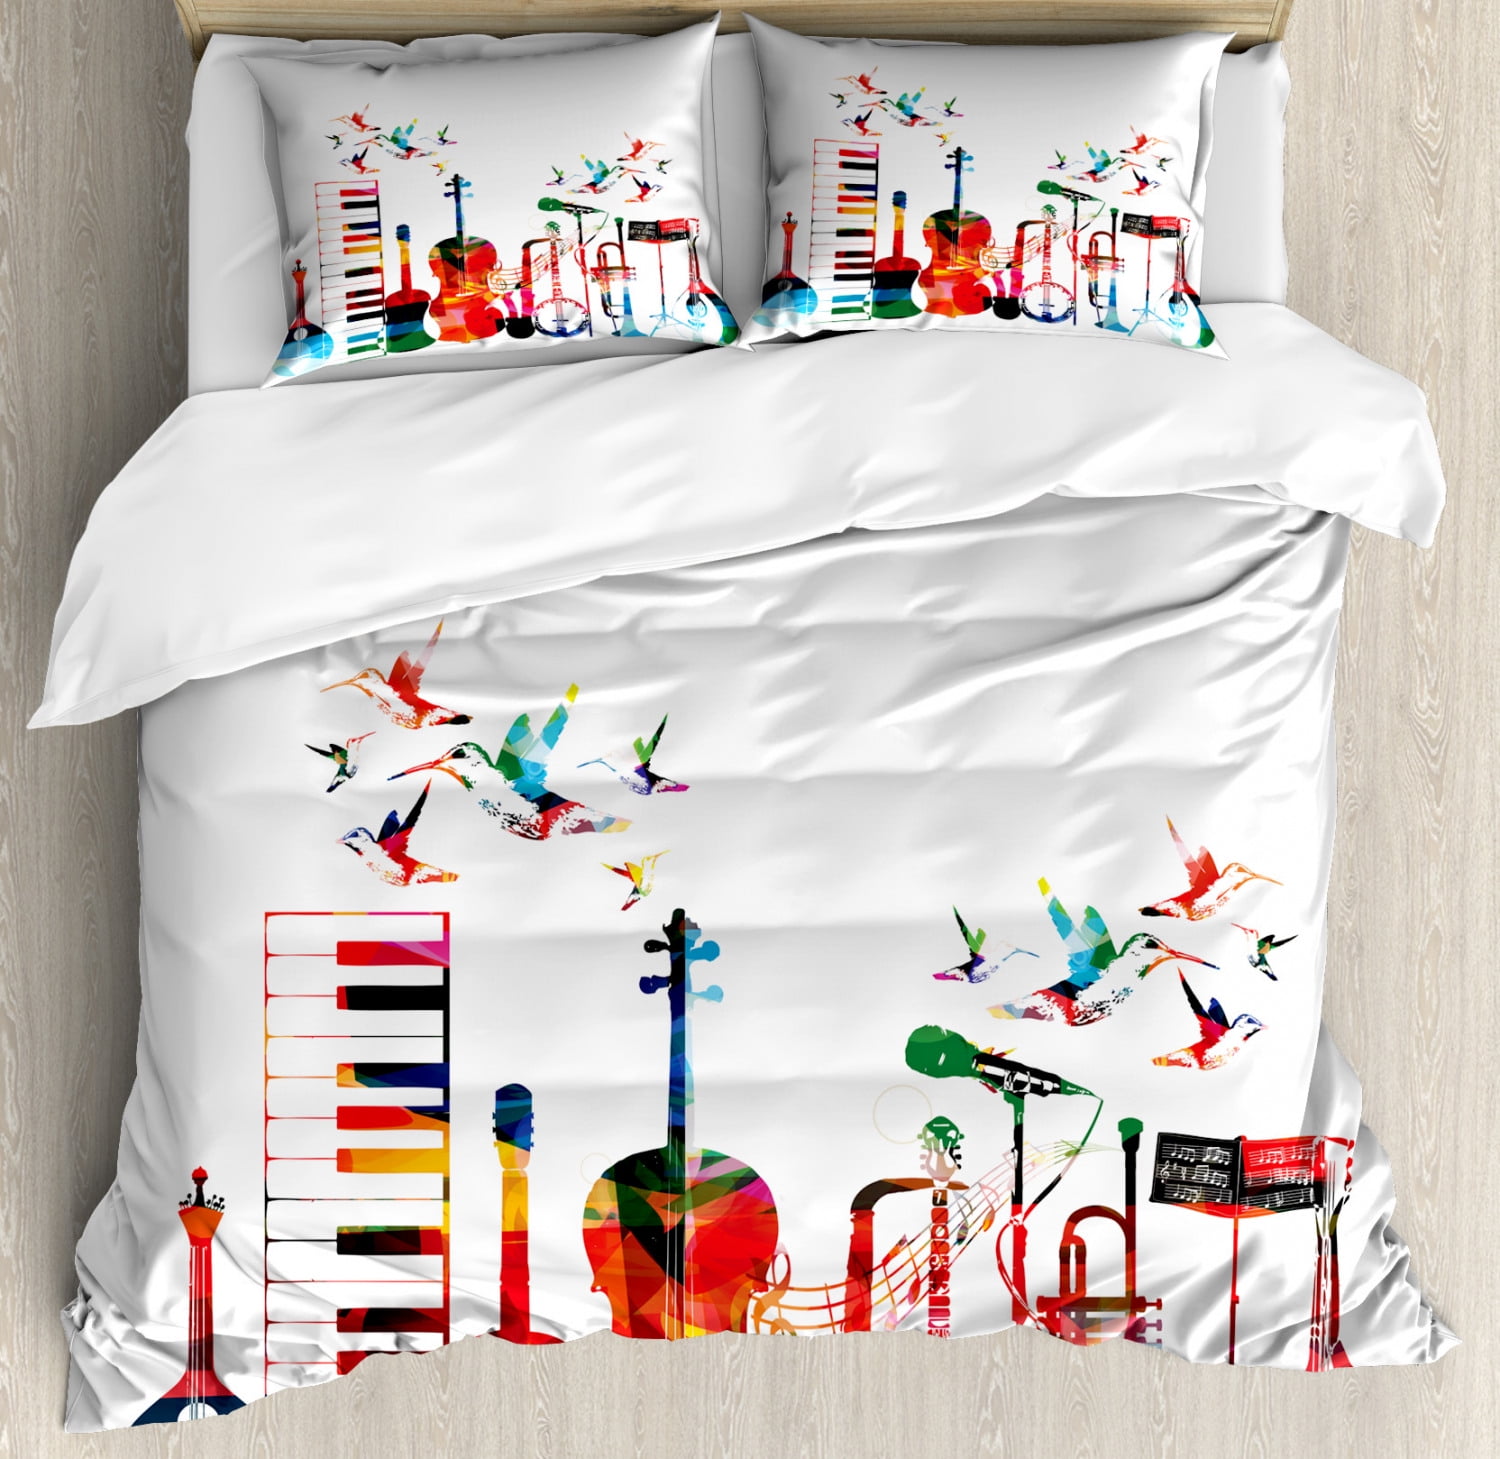 Music Duvet Cover Set Colorful Musical Instruments Keyboard